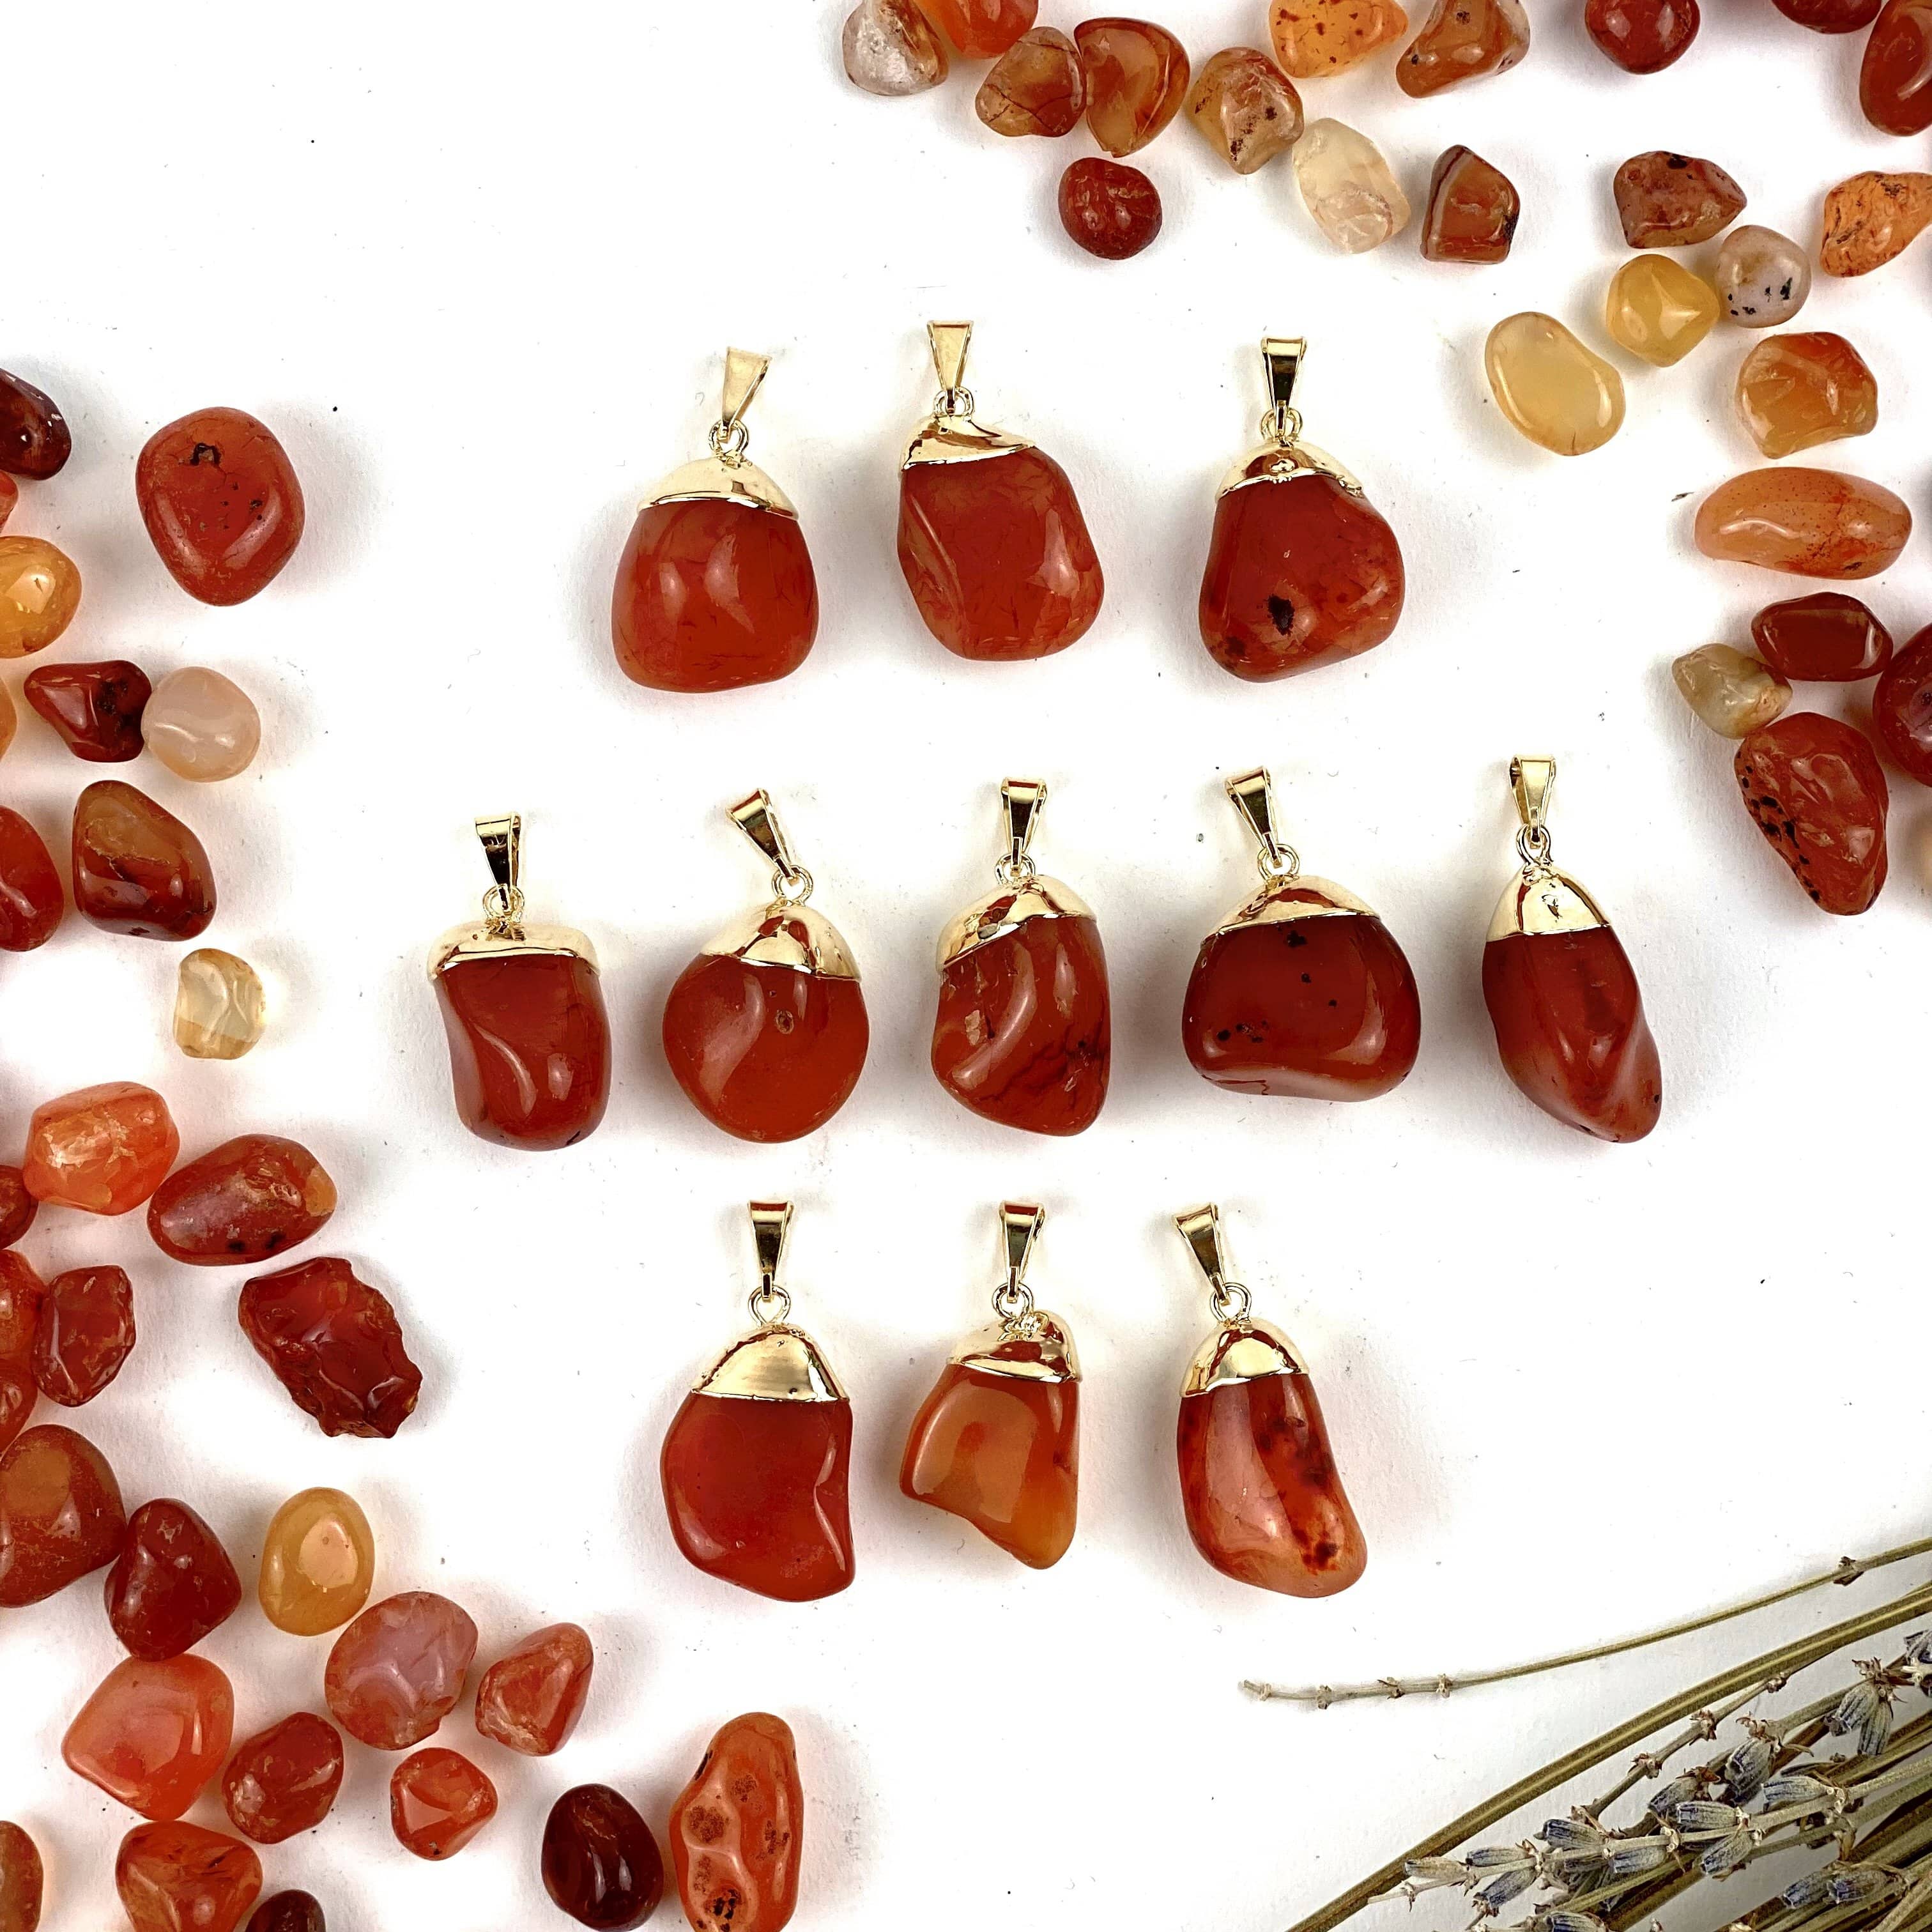 WHOLESALE 5PC 925 SOLID STERLING SILVER CUT RED CARNELIAN PENDANT LOT I223 